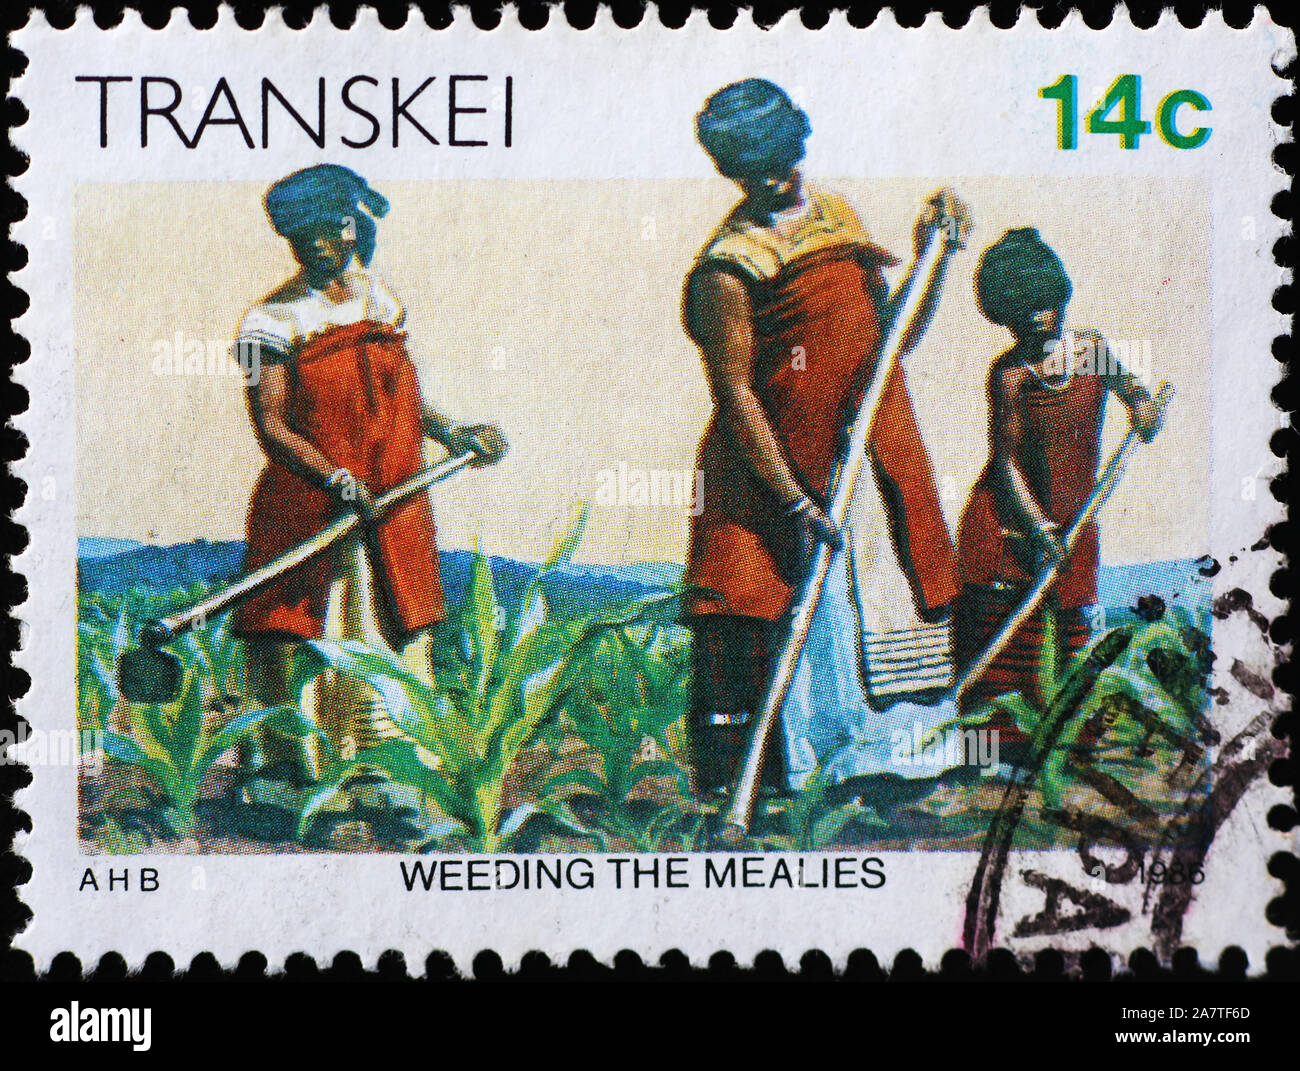 Women weeding a field on south african stamp Stock Photo